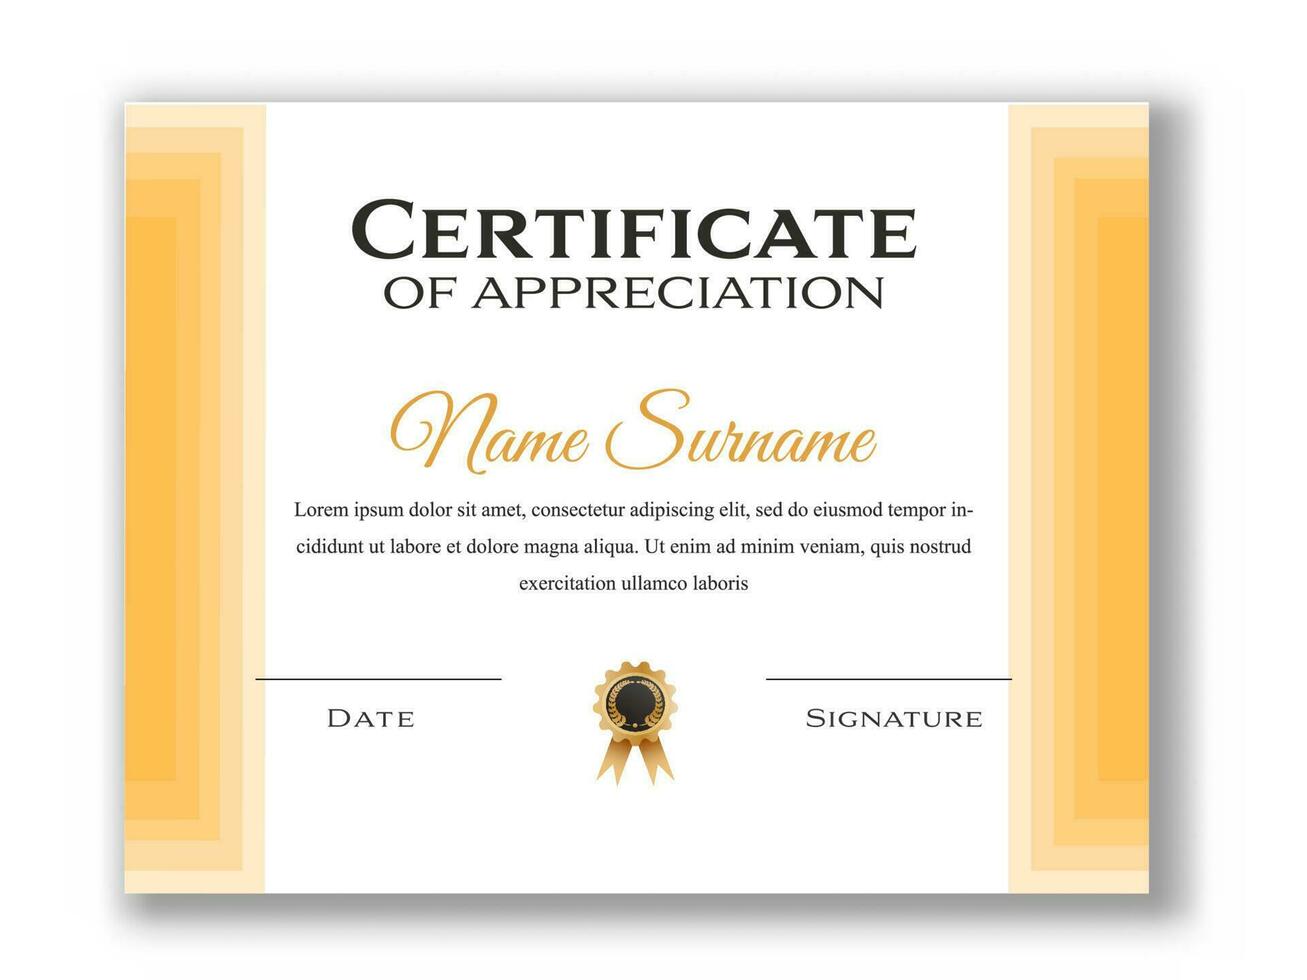 Certificate Of Appreciation Award Template Design In Yellow And White Color. vector